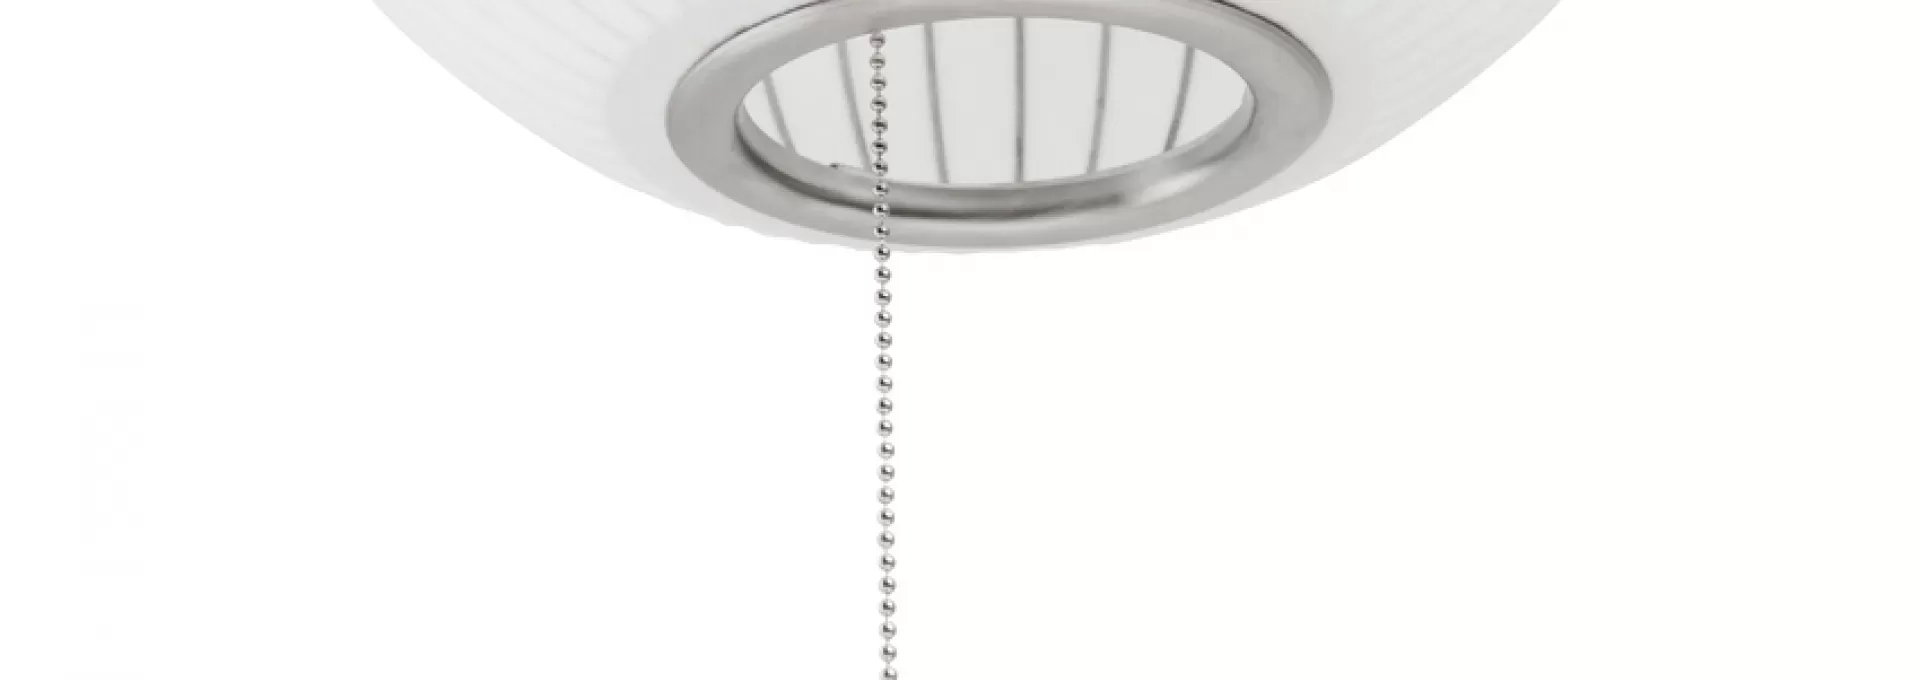 Designoffice | HermanMiller | NELSON BALL WALL SCONCE CABLED